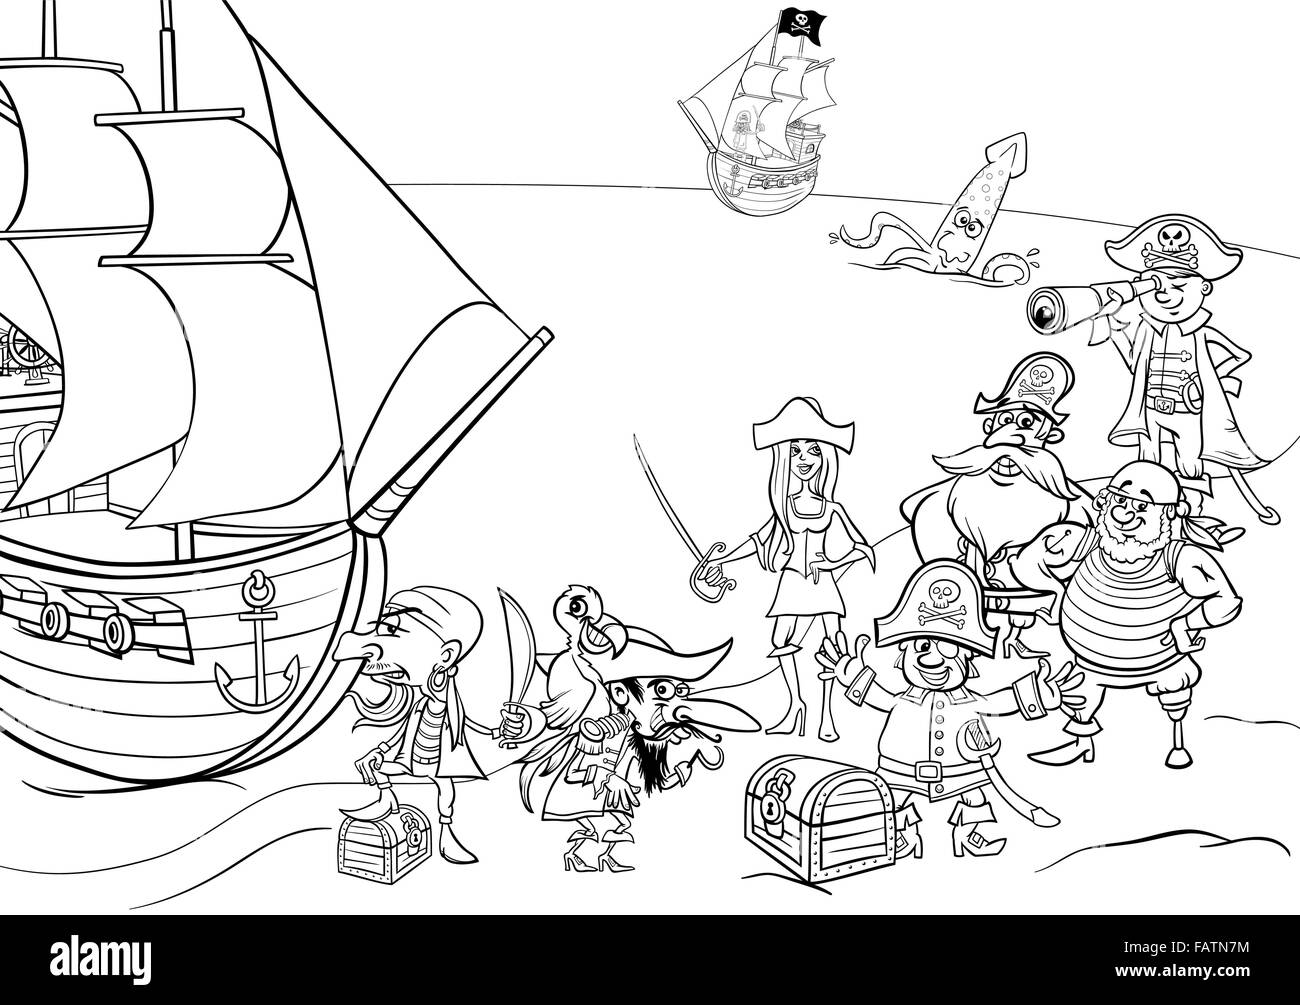 Black and White Cartoon Illustrations of Fantasy Pirate Characters with Ship on Treasure Island for Coloring Book Stock Vector